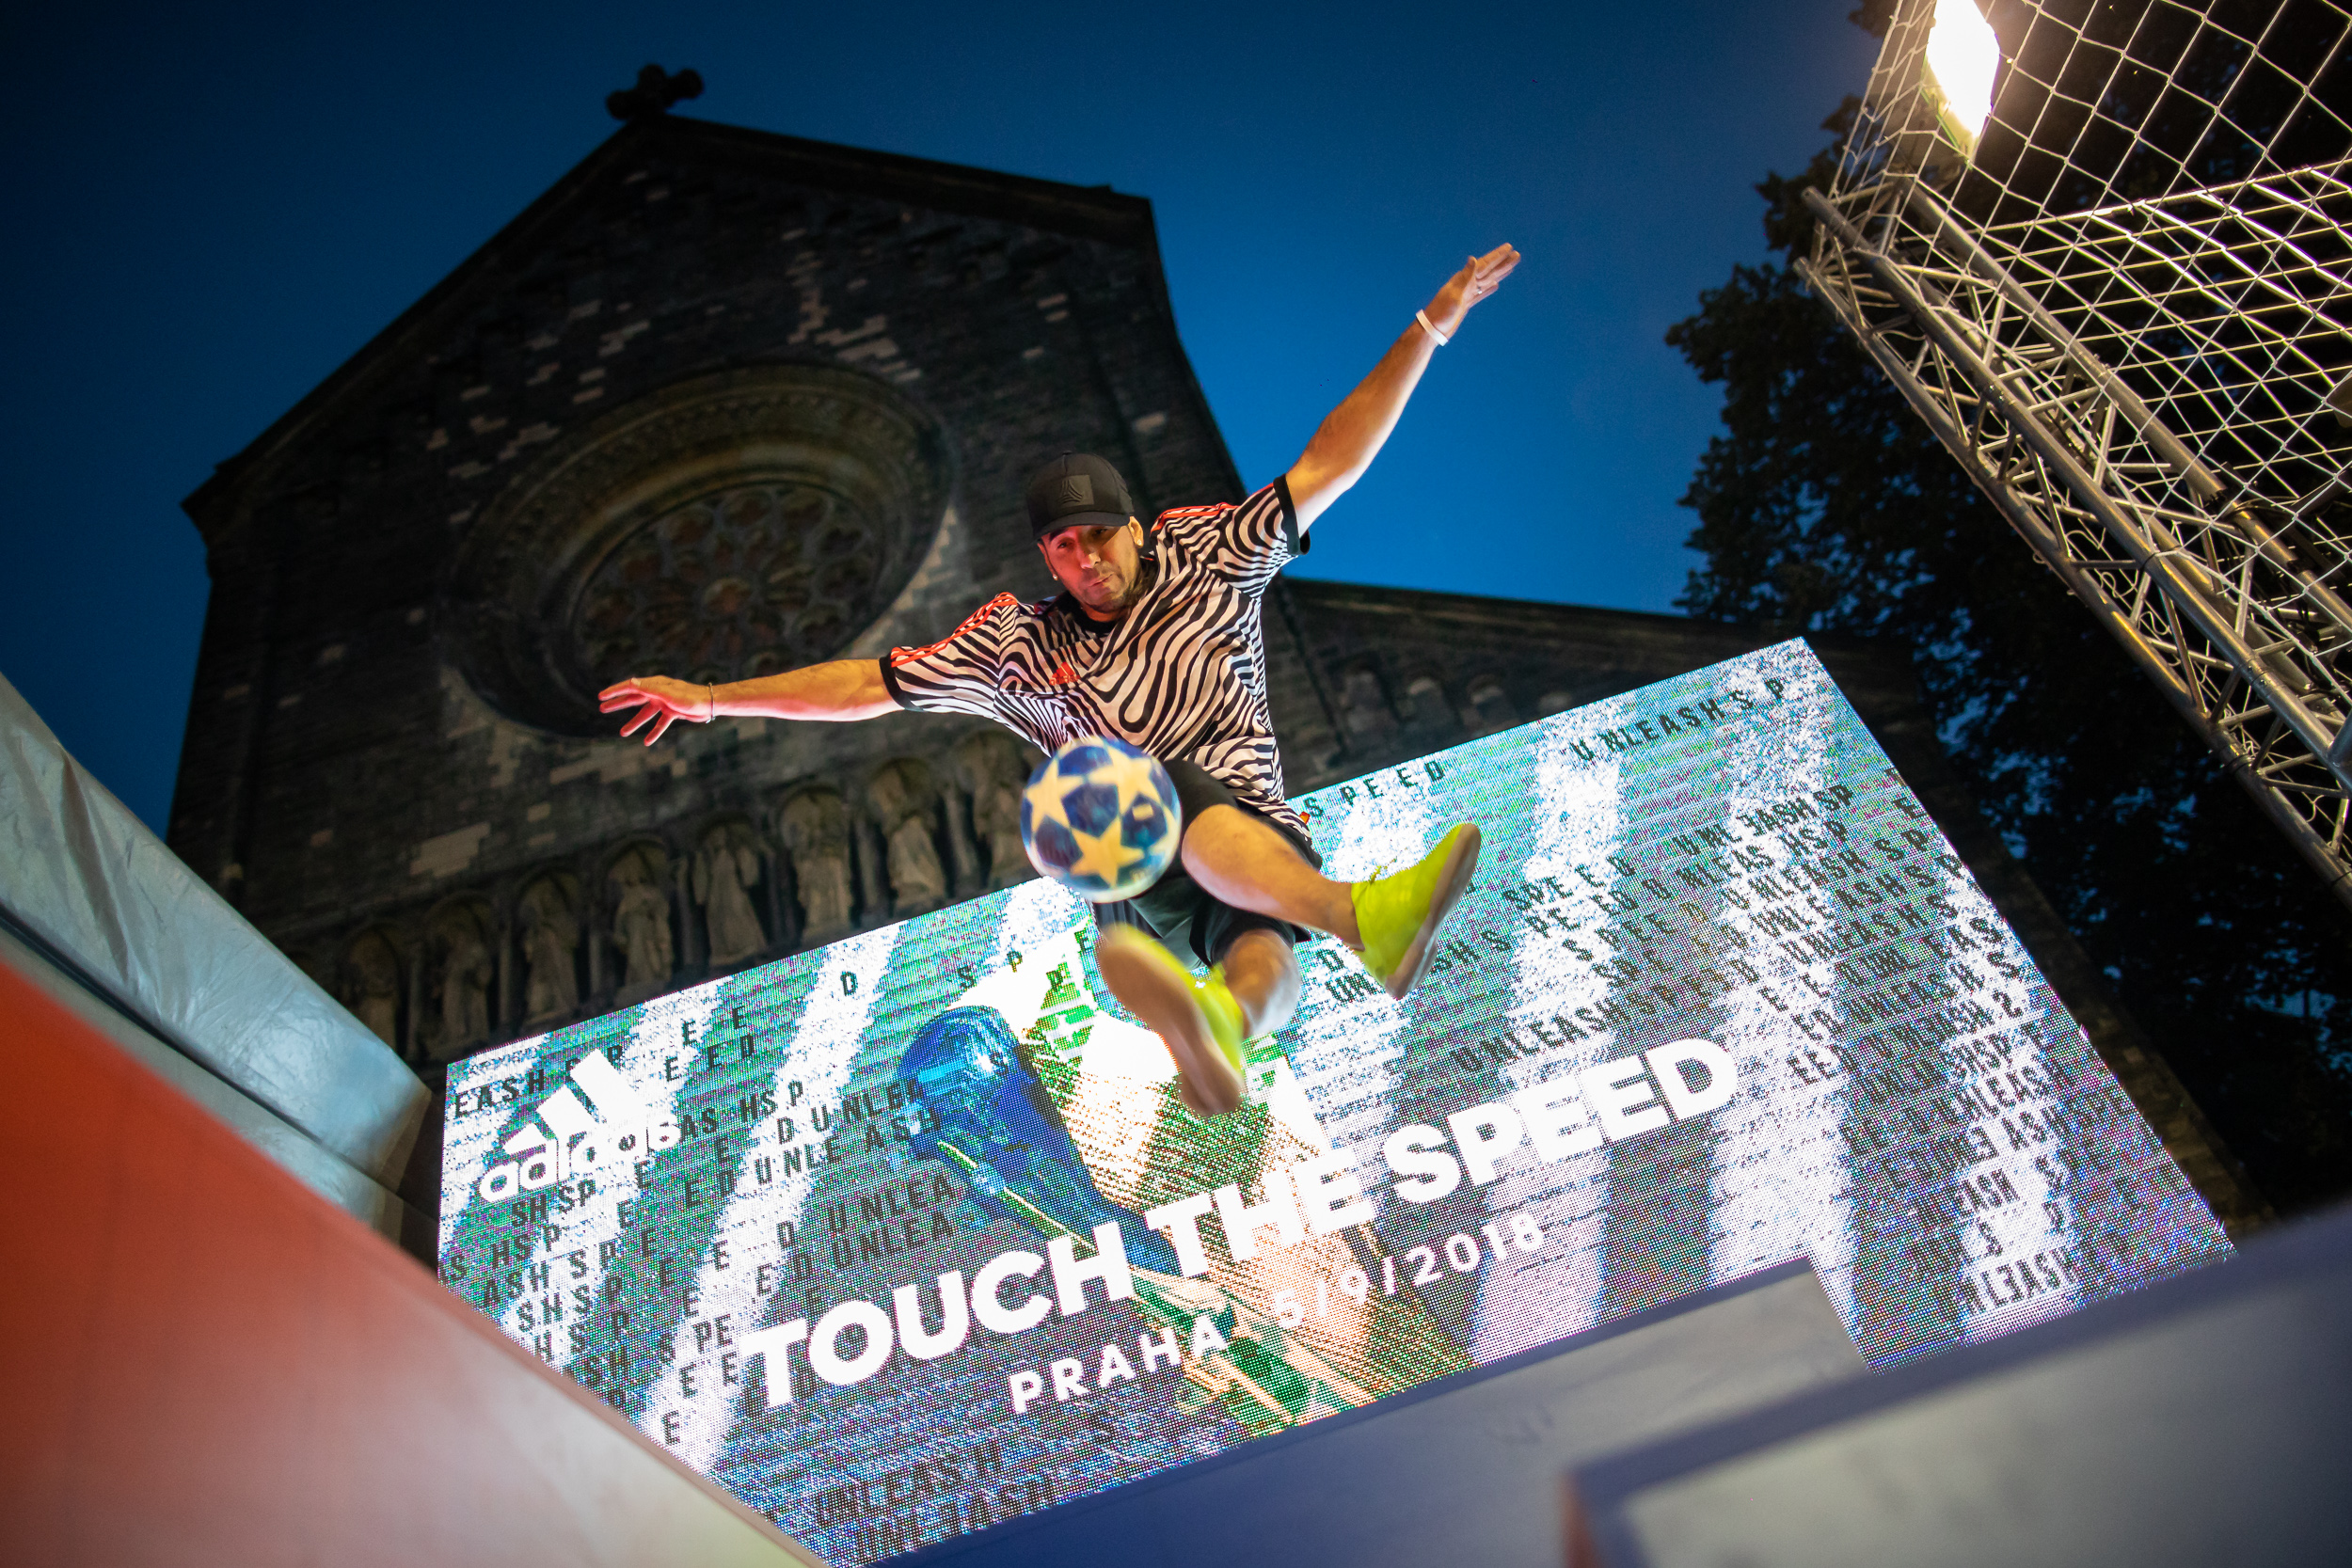 We hosted the adidas Touch the Speed tournament